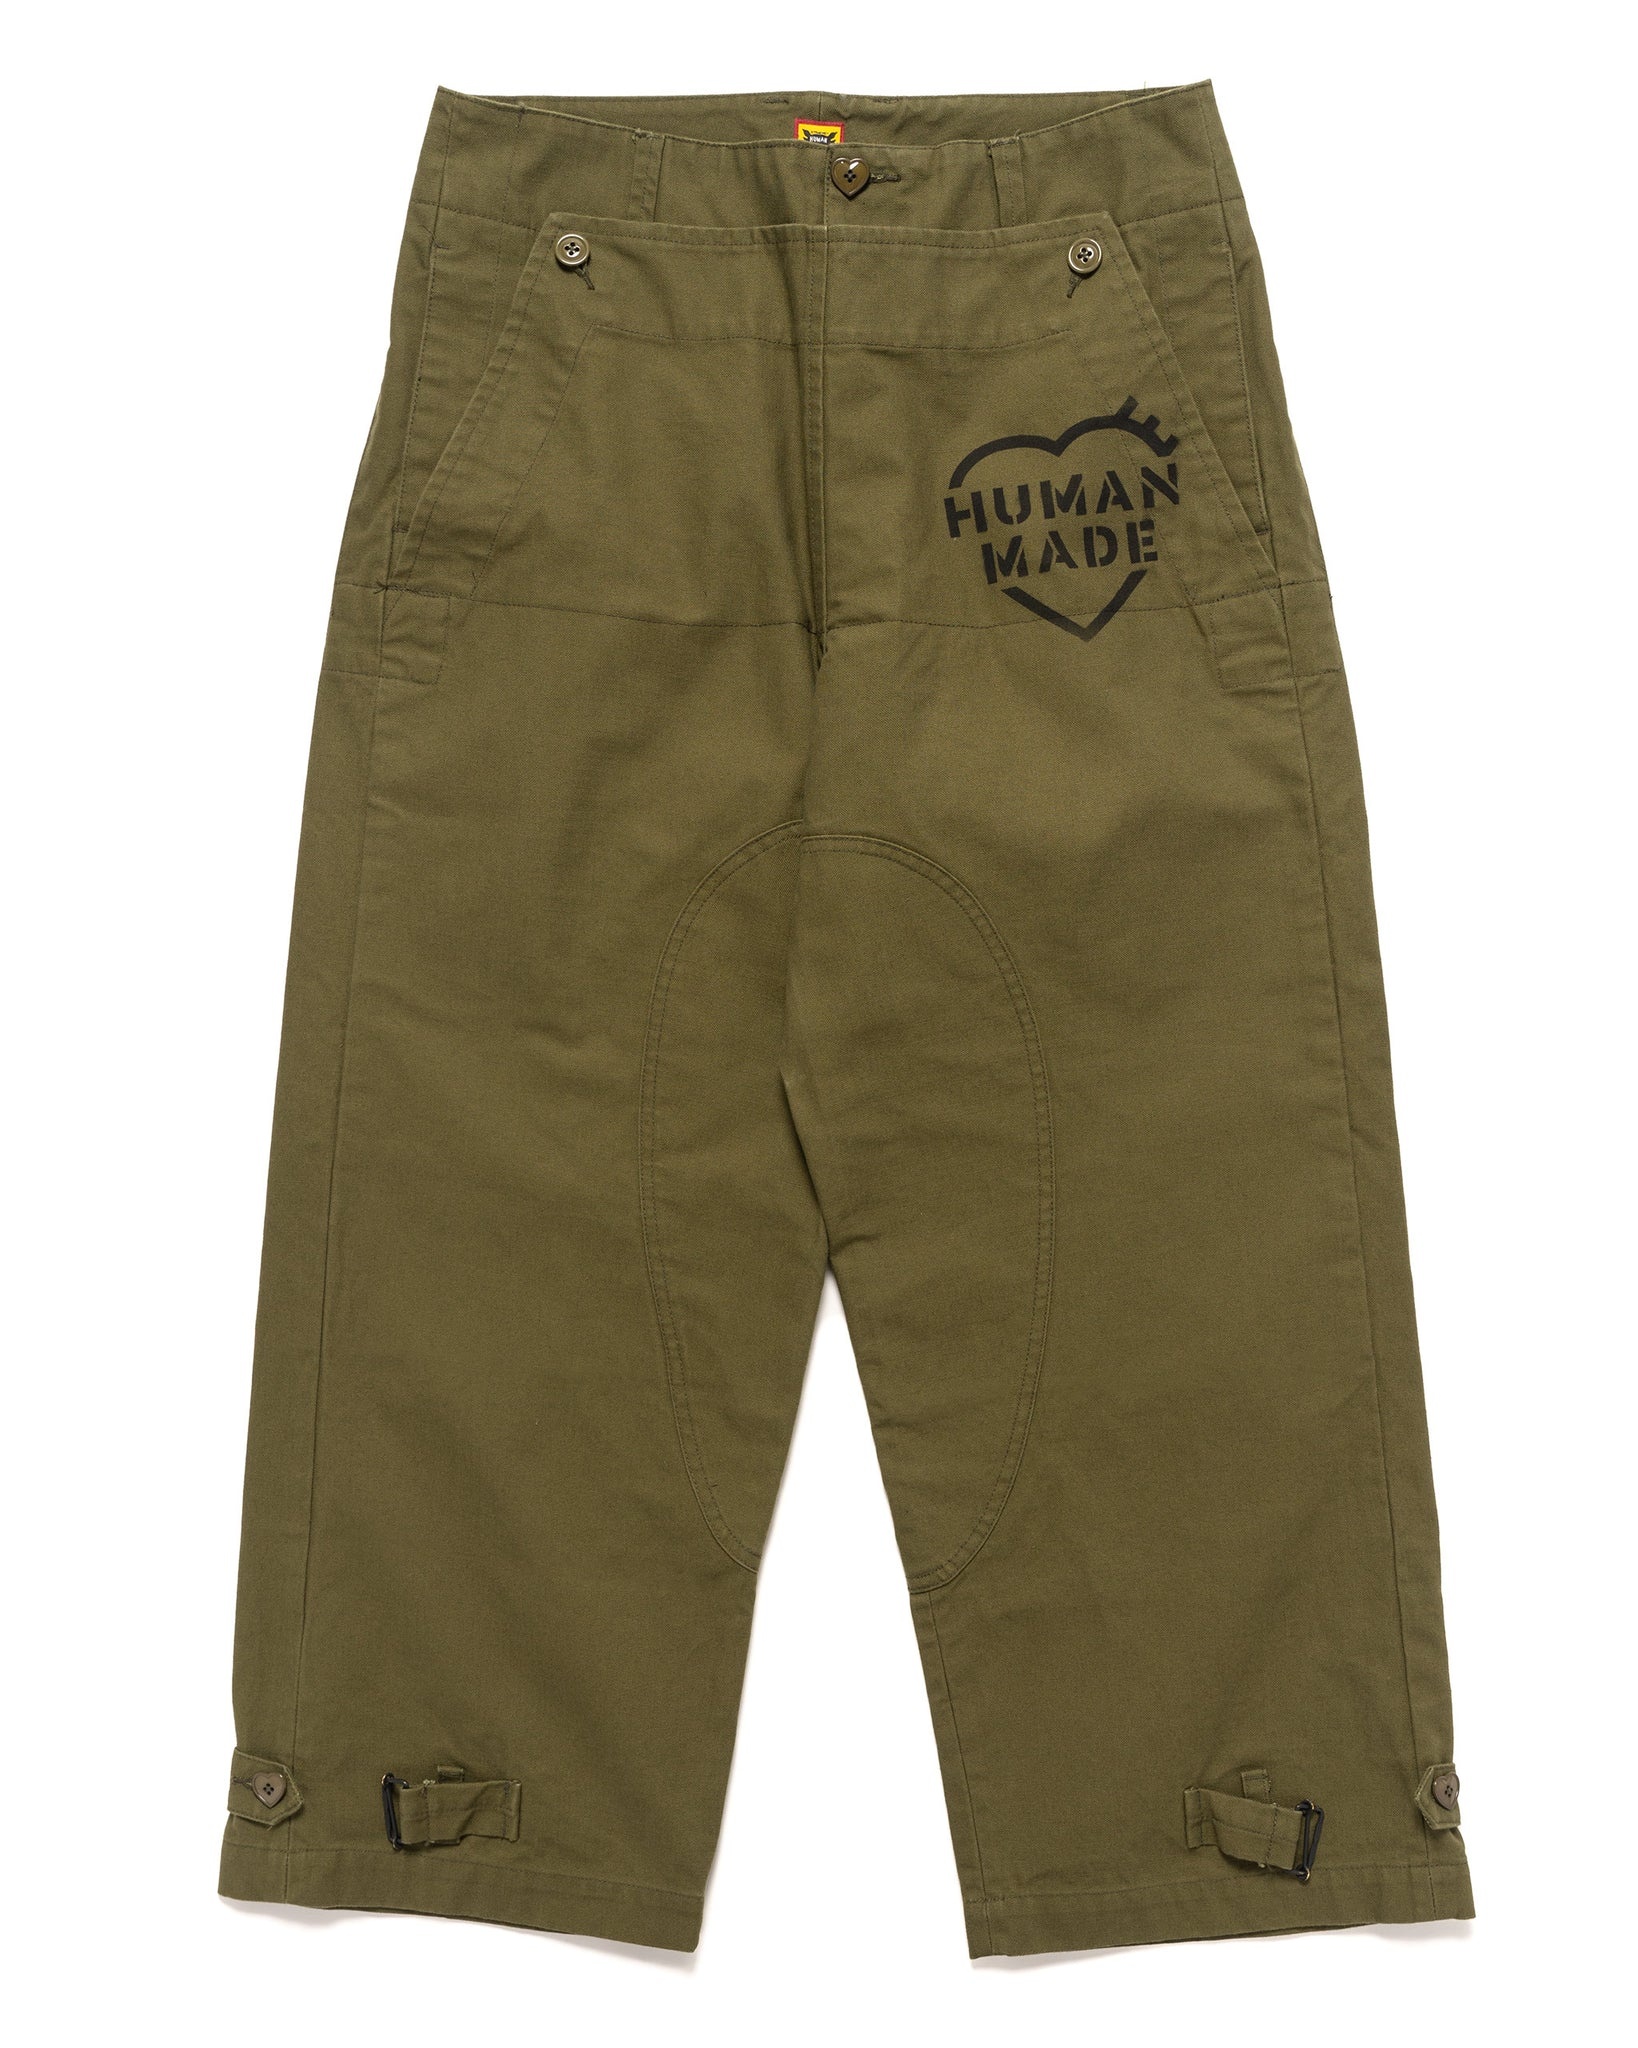 MILITARY MOTORCYCLE PANTS OLIVE DRAB - 1